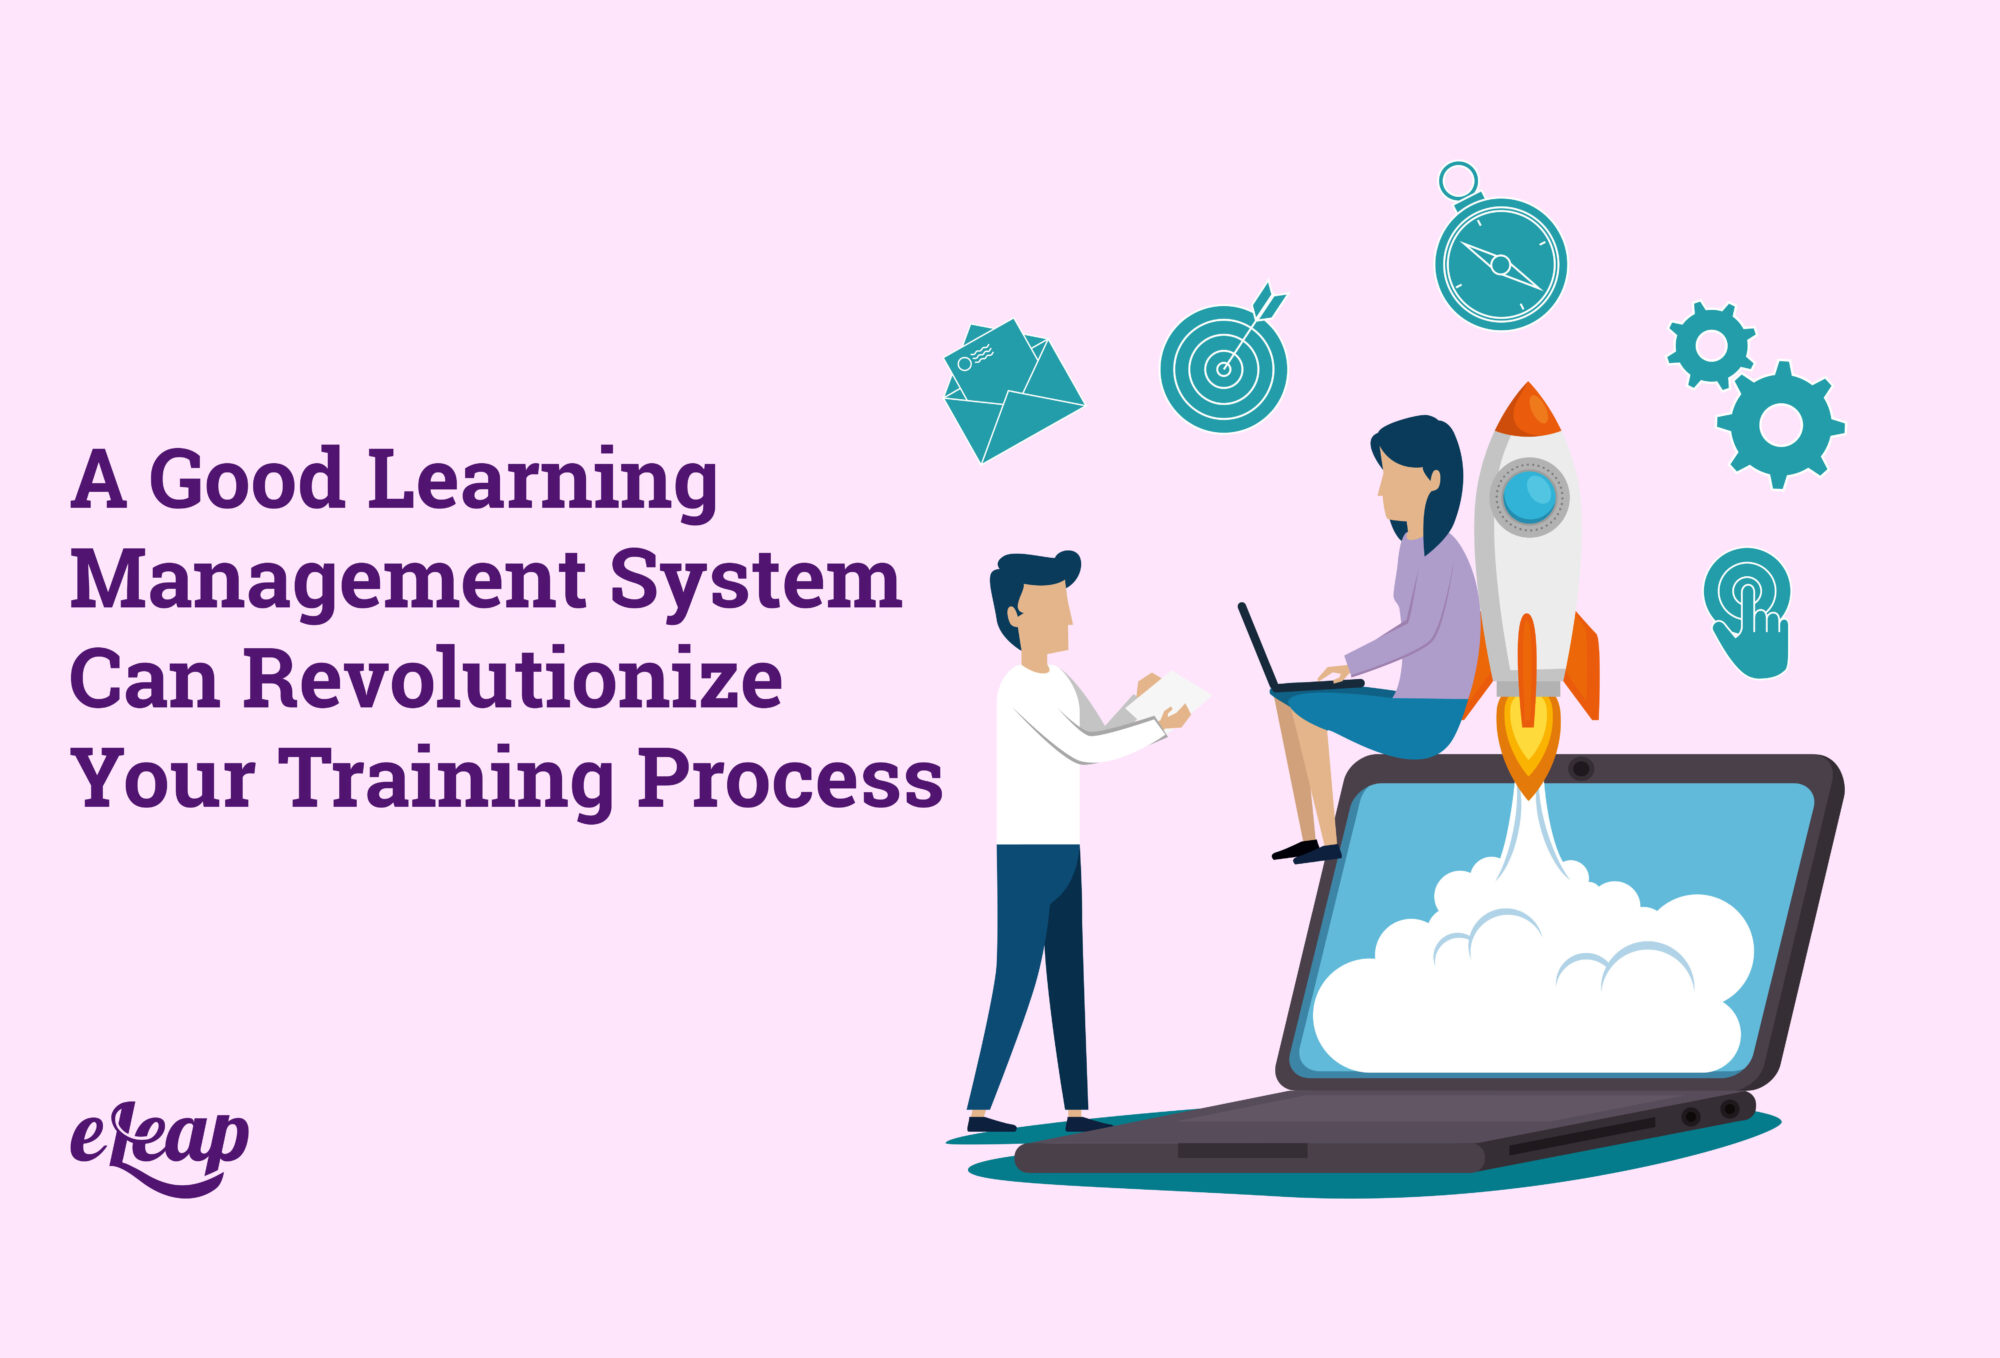 A Good Learning Management System Can Revolutionize Your Training Process